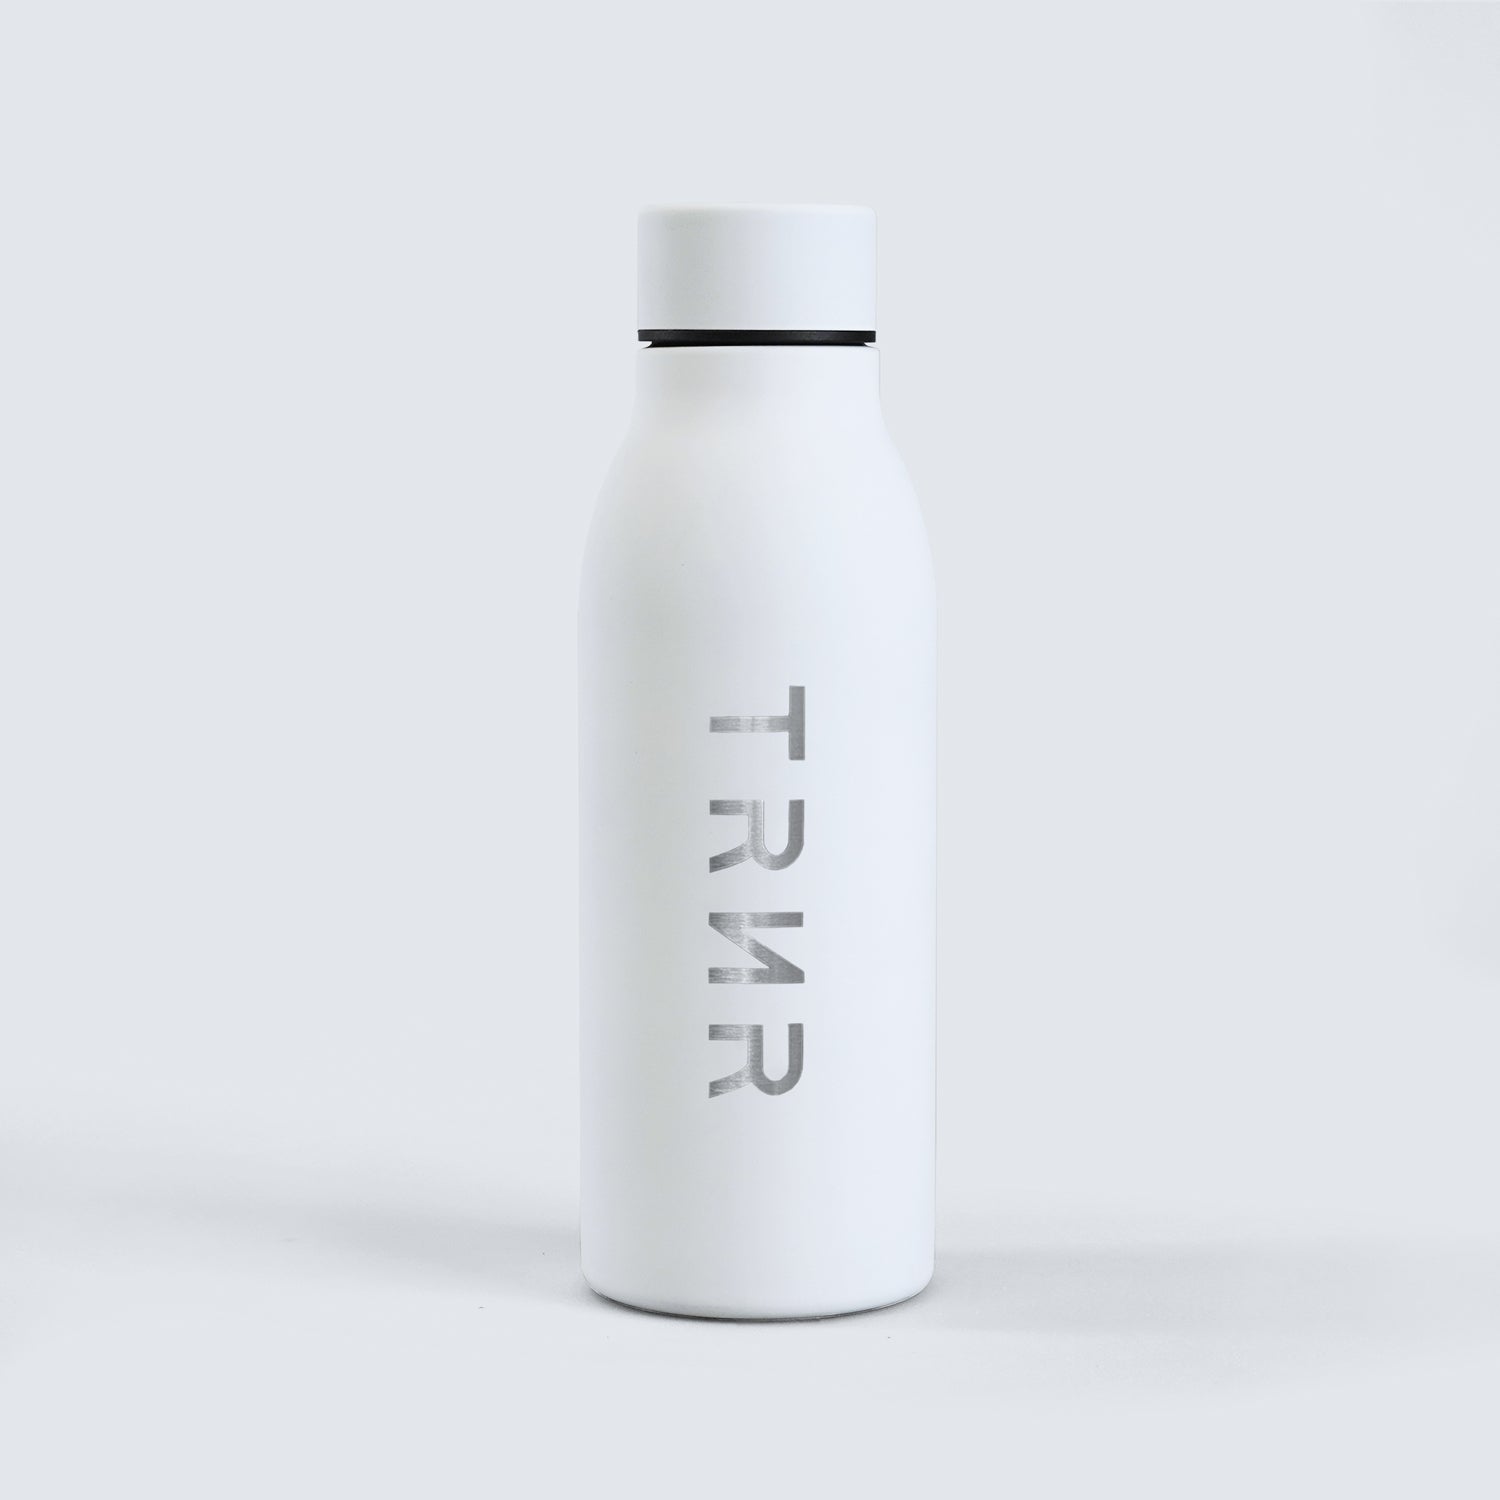 TRNR Bliss Bottle (White) in 600 ml capacity | Product Overview Featuring TRNR Logo and Powder-Coated Finish